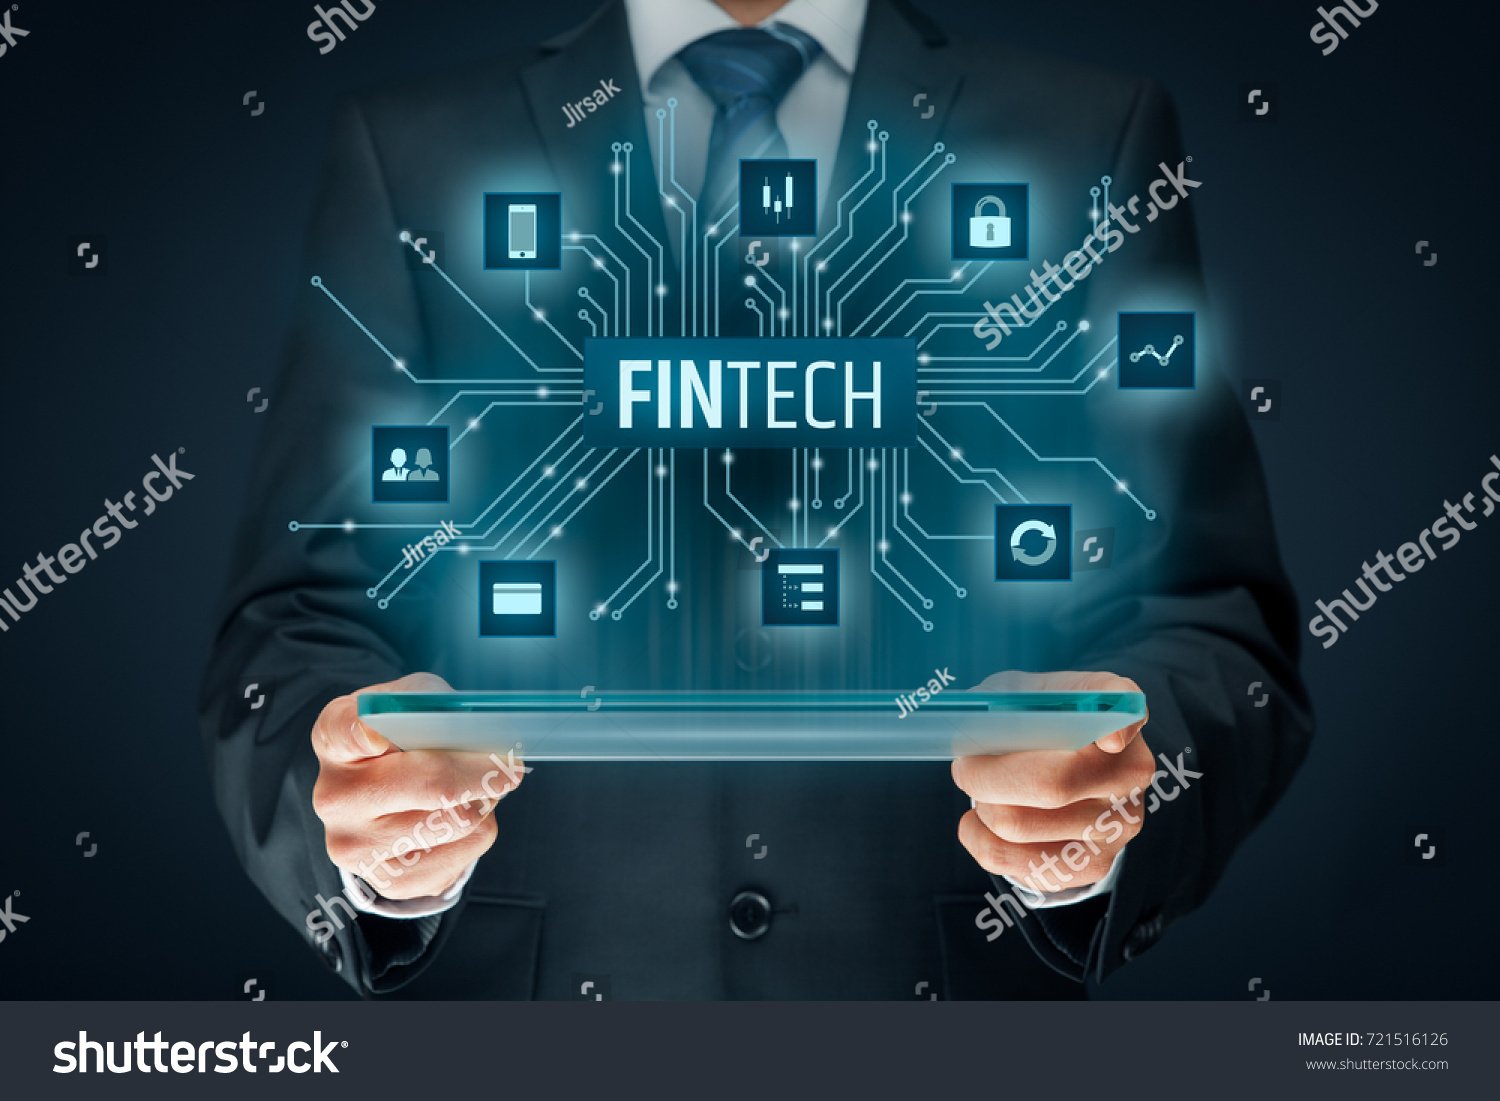 Fintech (financial technology) concept. Business person with tablet and fintech illustration. #721516126